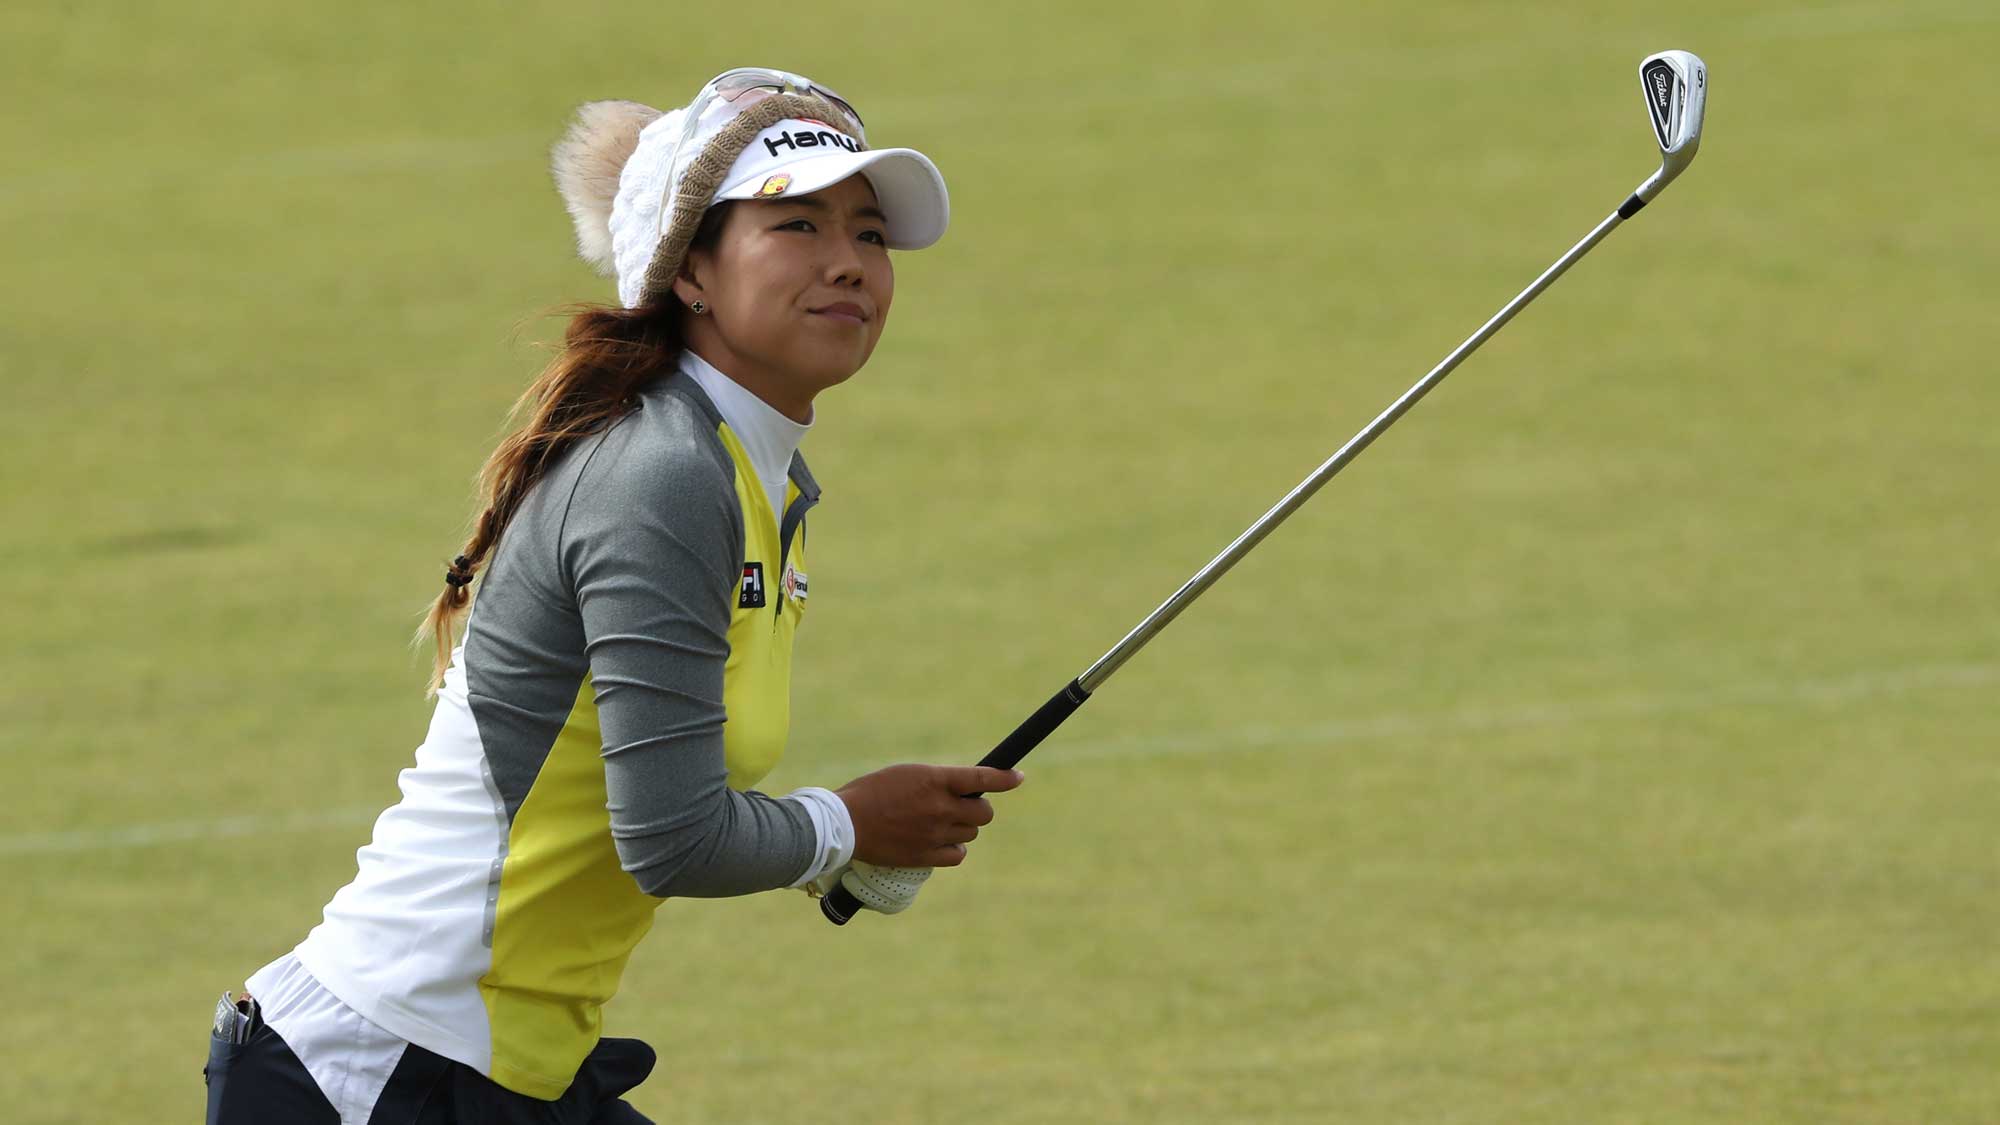 Jenny Shin of Korea hits her second shot on the 18th hole during the second round of the Ricoh Women's British Open at Kingsbarns Golf Links